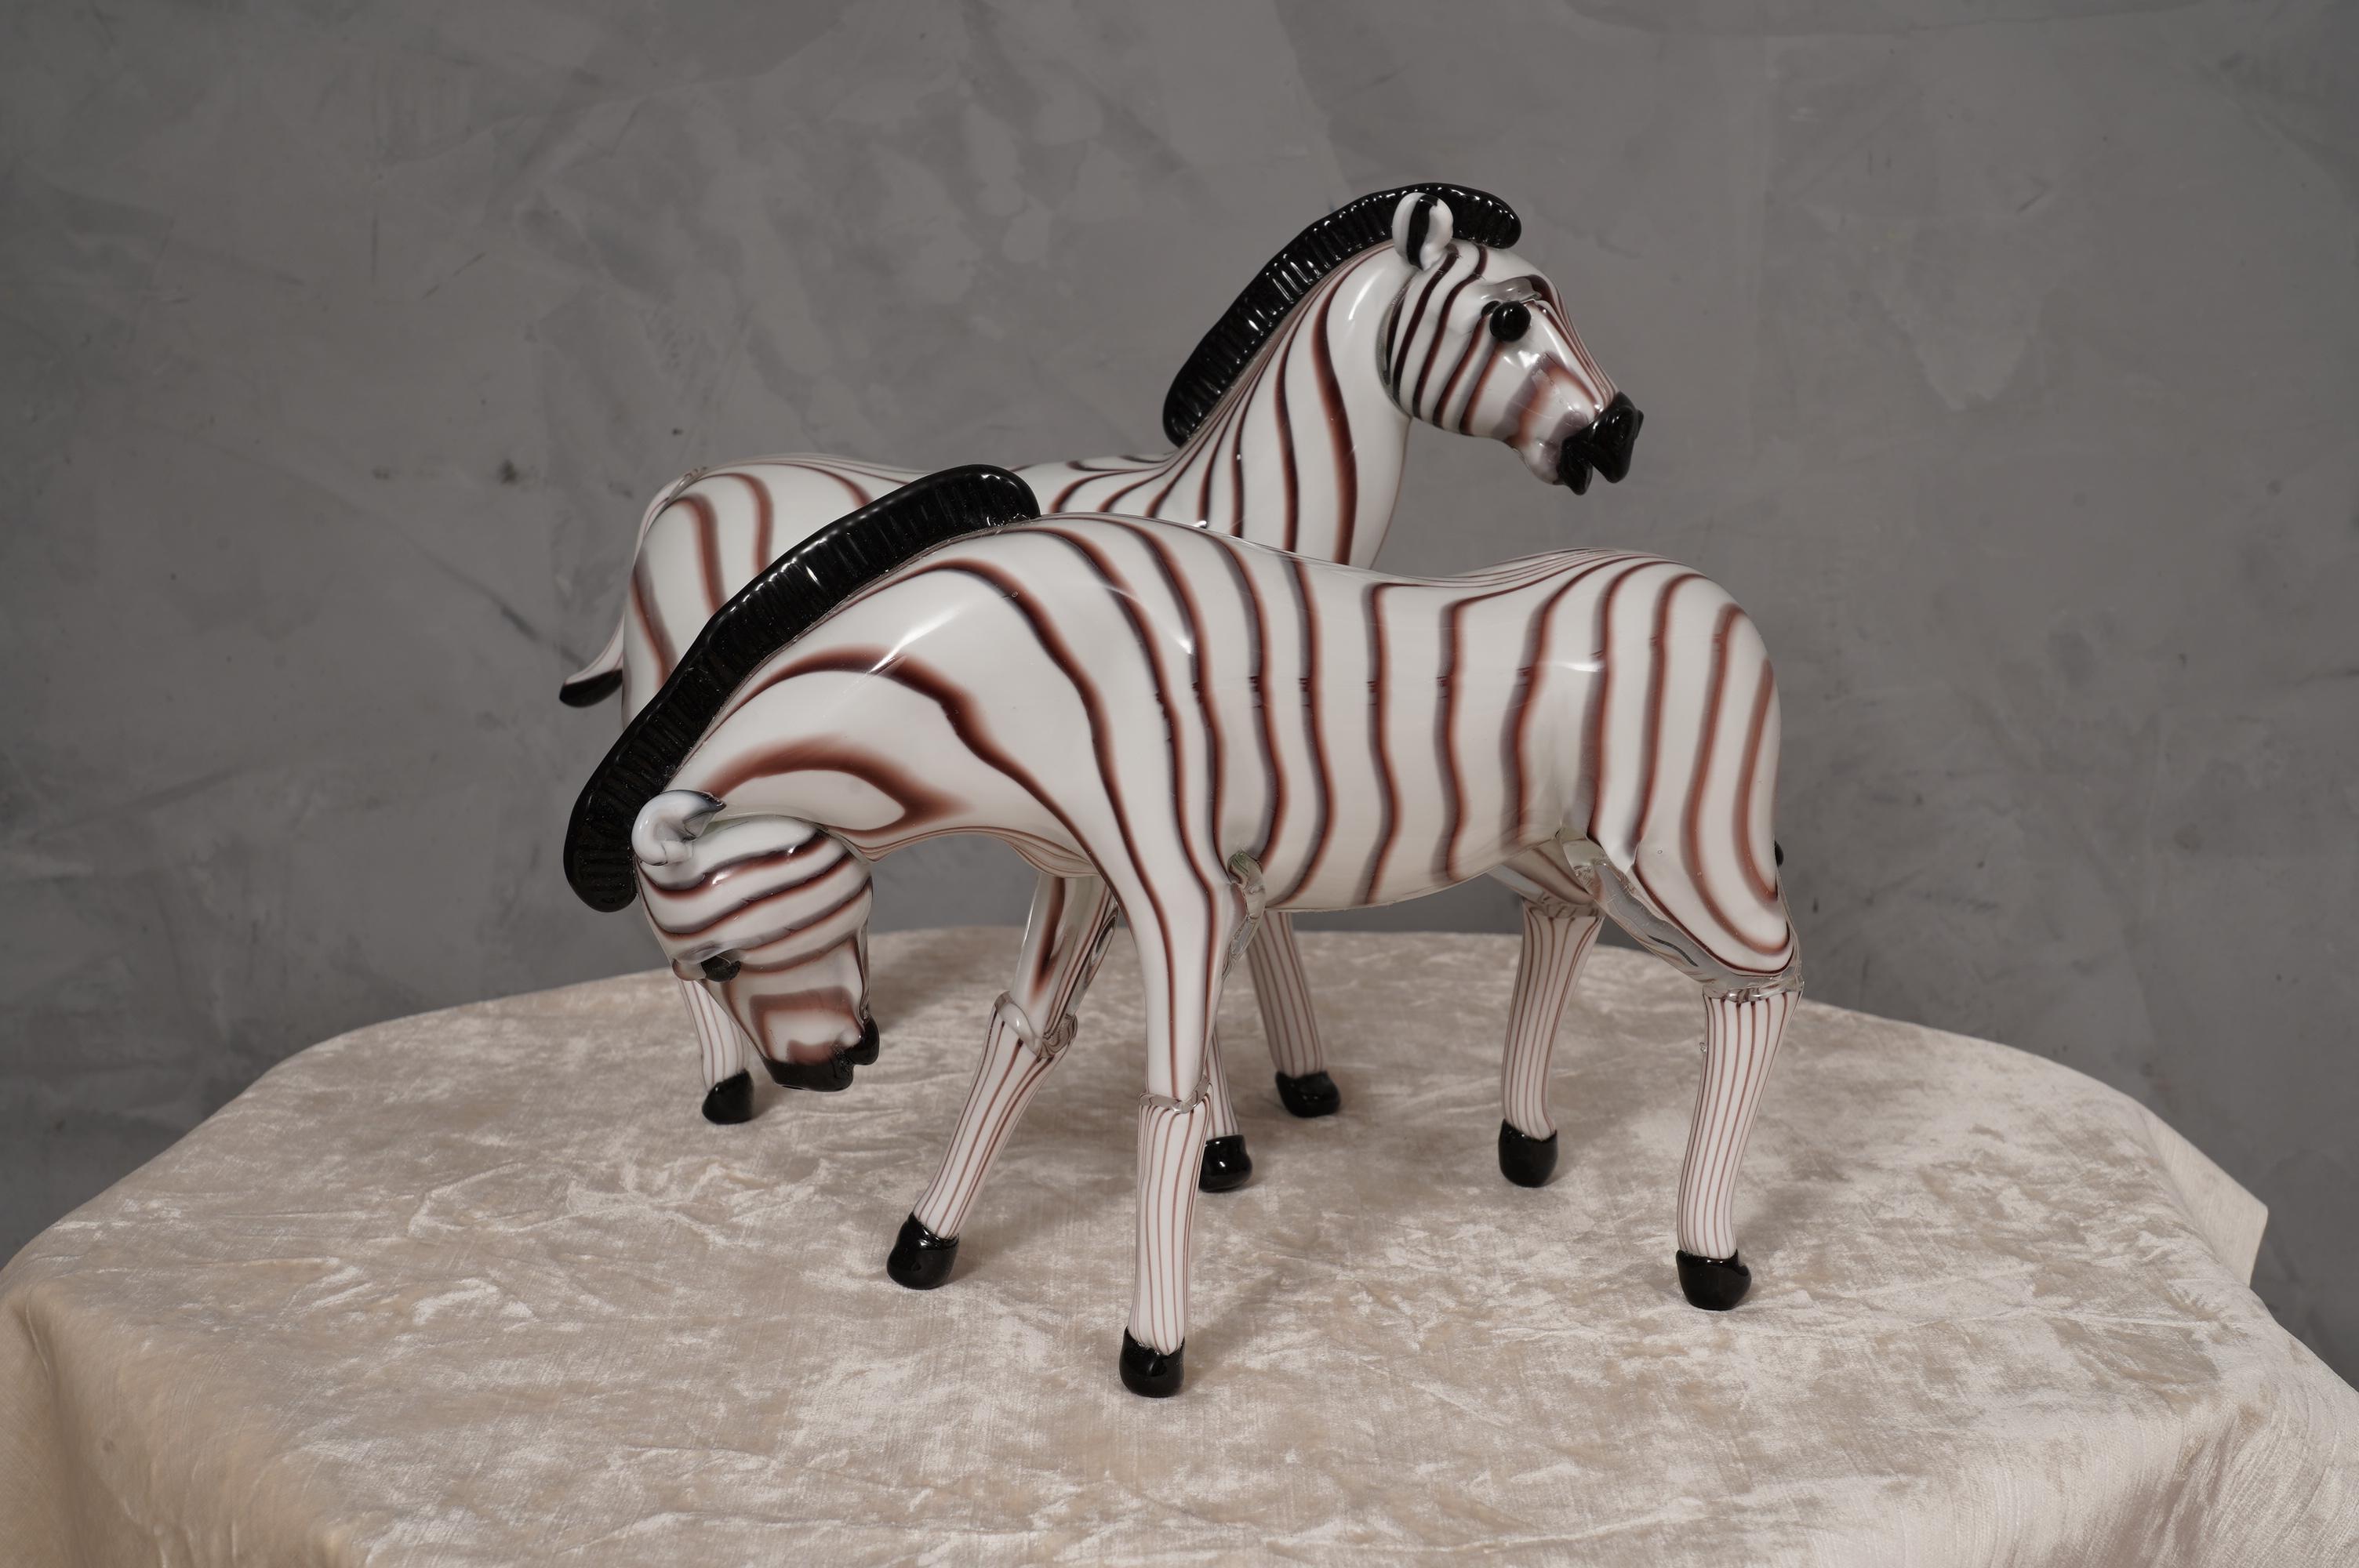 Murano Black and White Glass Sculptures, 1980 For Sale 1